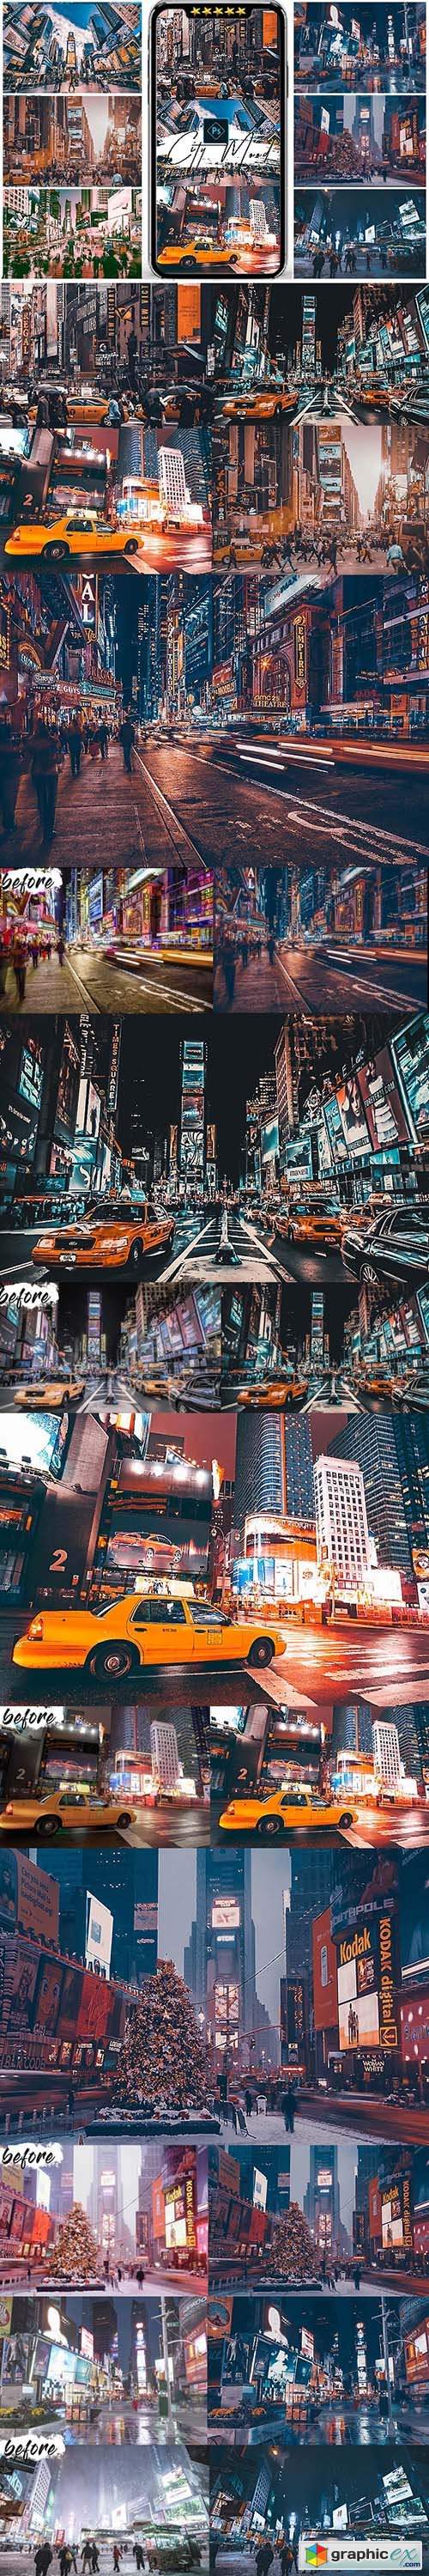 City Mood Photoshop Actions 